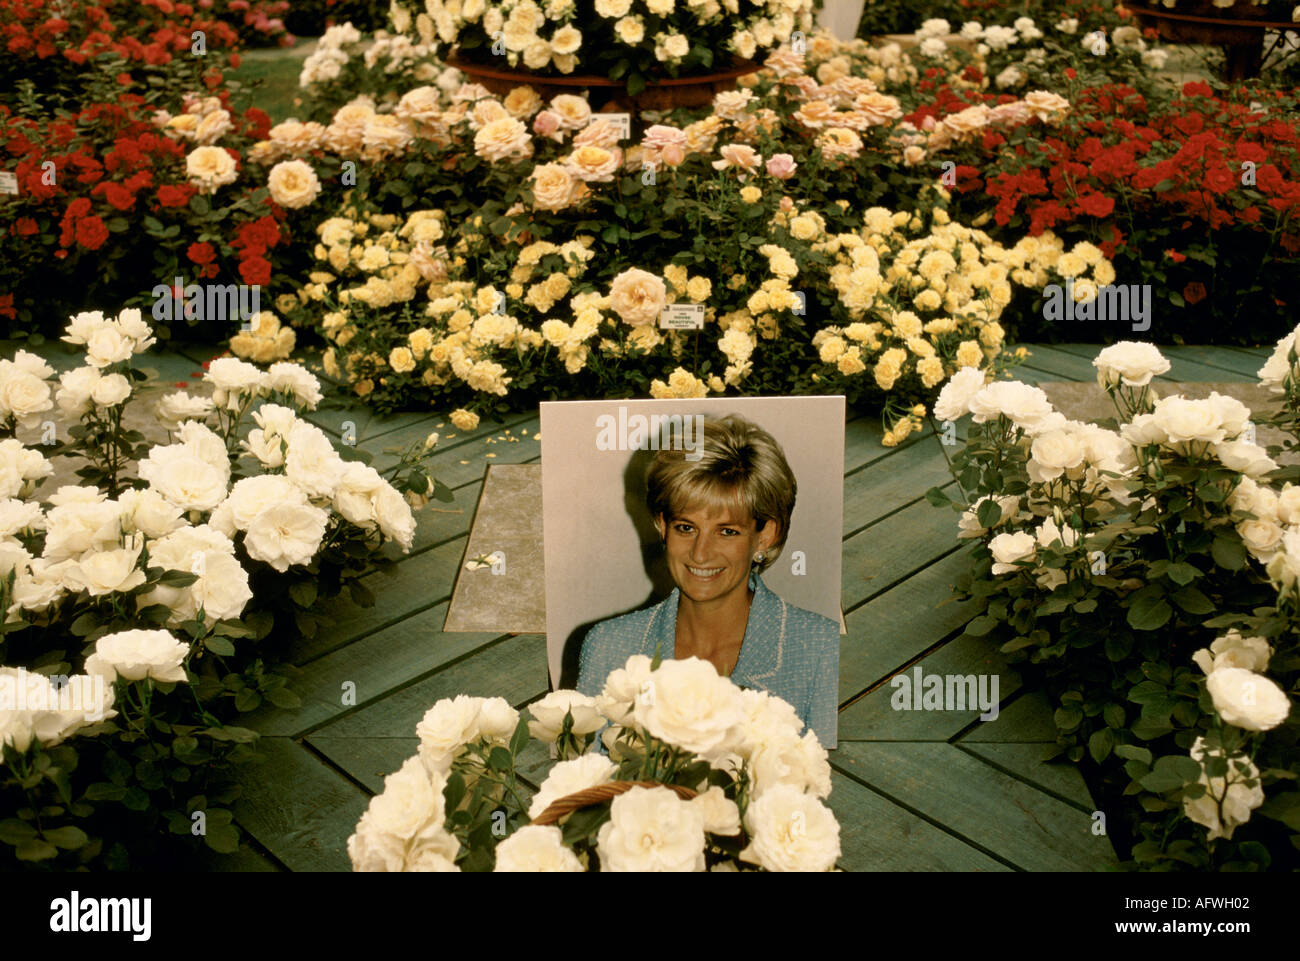 Chelsea Flower Show Princess Diana Roses 1997. Princess Diana of Wales  flower named after her 1970S UK HOMER SYKES Stock Photo - Alamy